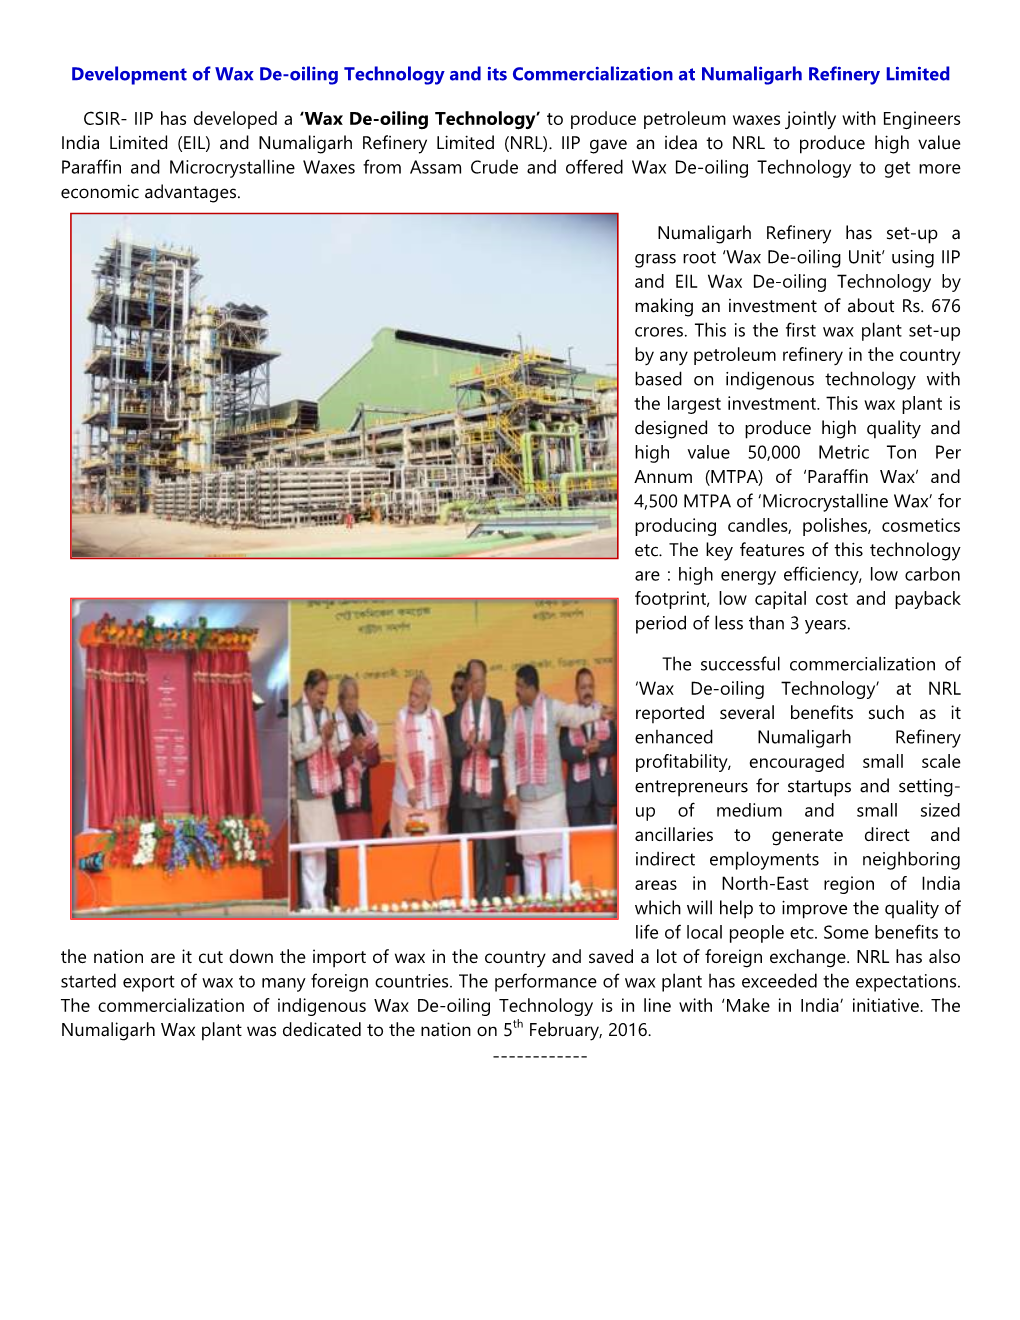 Development of Wax De-Oiling Technology and Its Commercialization at Numaligarh Refinery Limited